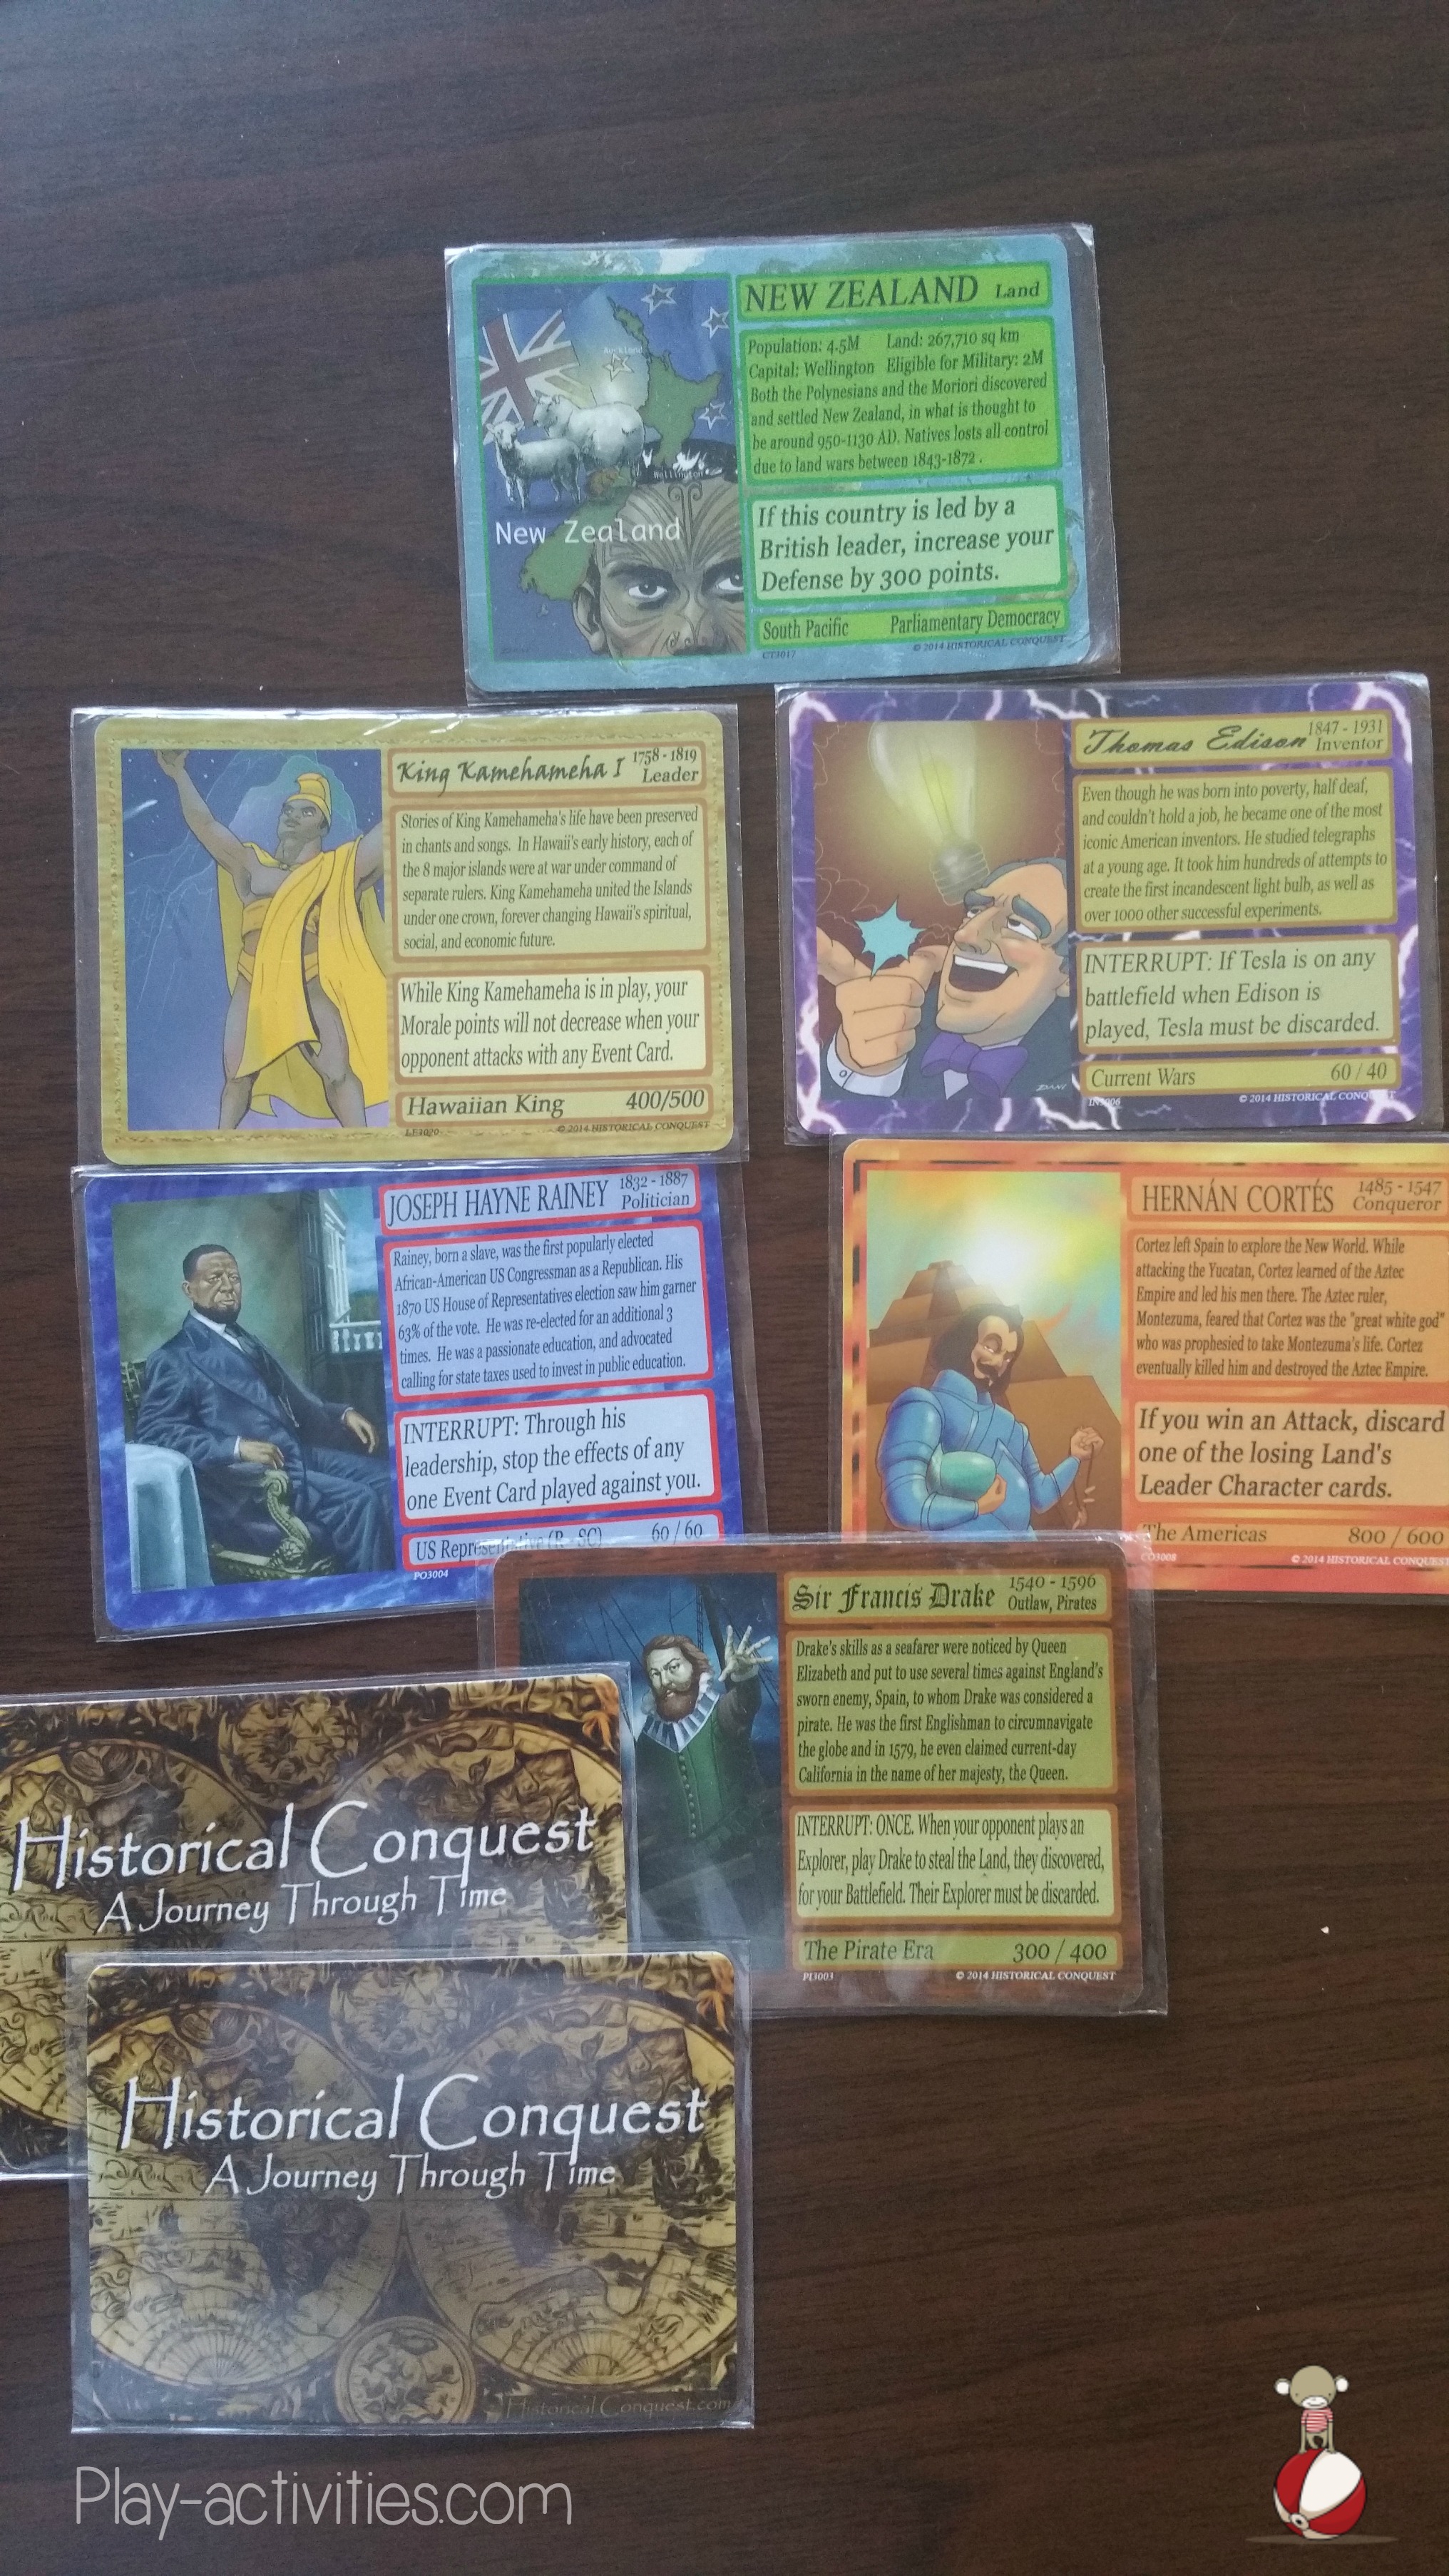 Things to Buy Instead of Curriculum : Historical Conquest Card game